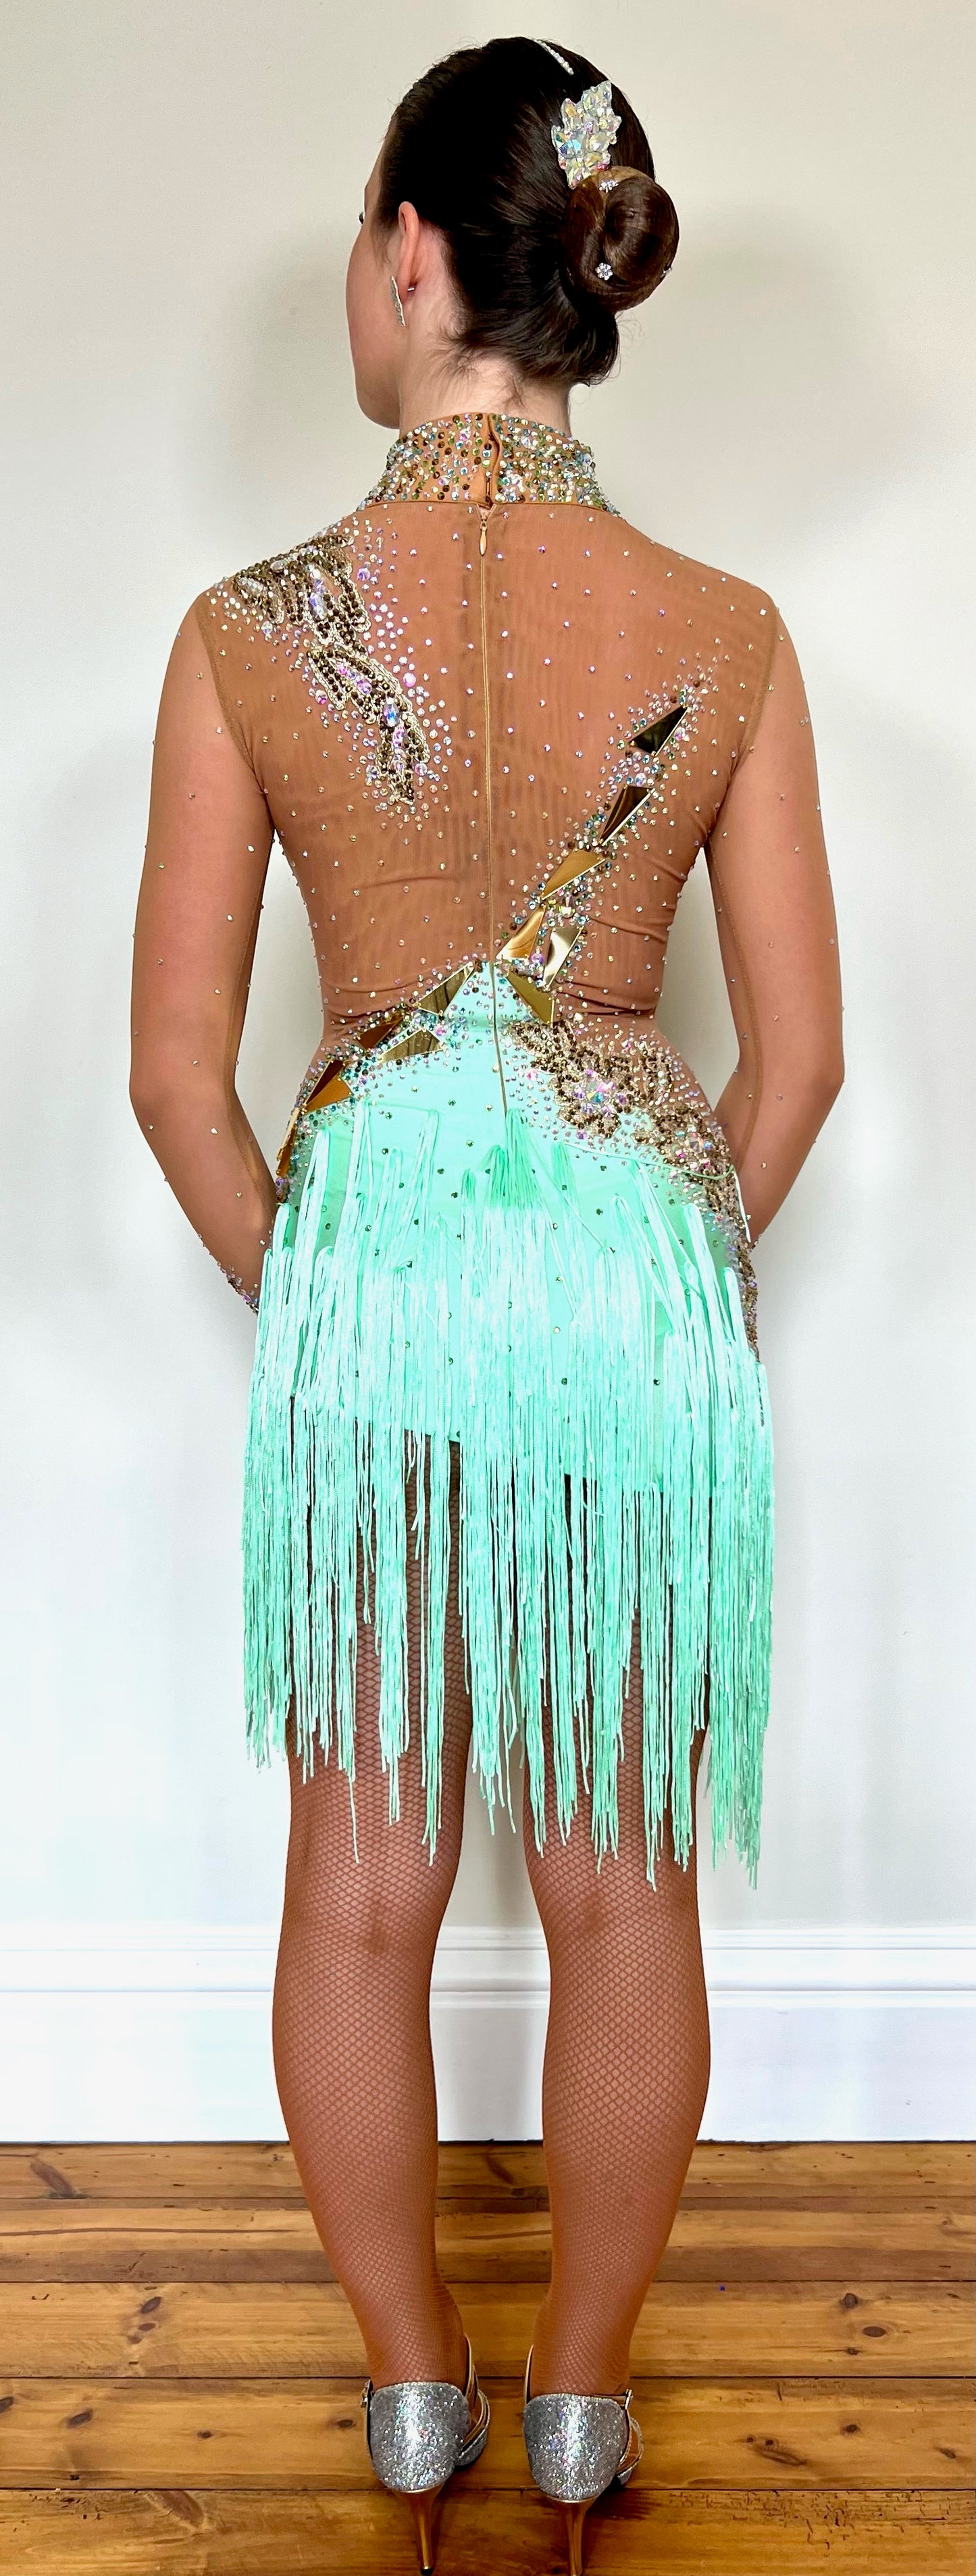 190 Tan mesh & mint Green High back Latin dress. Decorated with gold mirrors & AB stones.